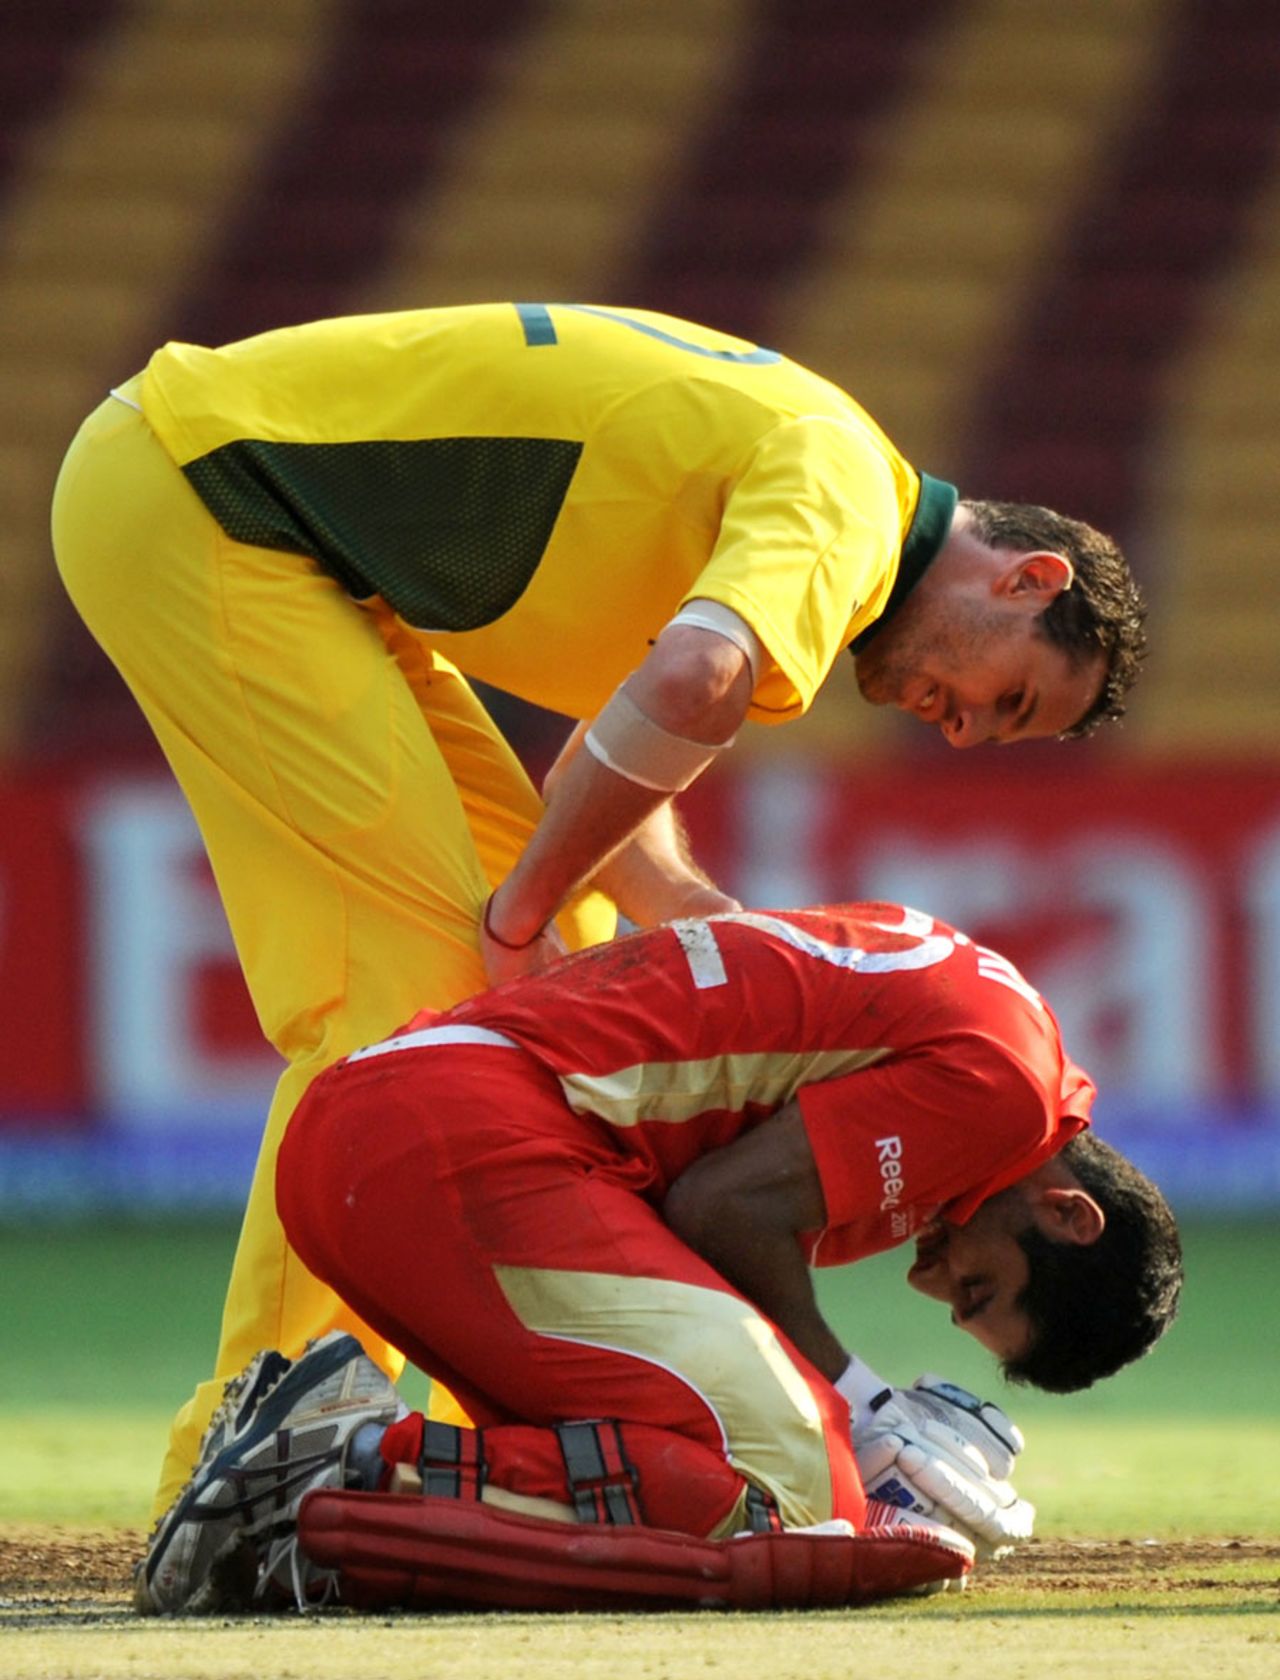 Shaun Tait checks on Zubin Surkari after he was hit by a short ball, Australia v Canada, Group A, World Cup, Bangalore, March 16, 2011